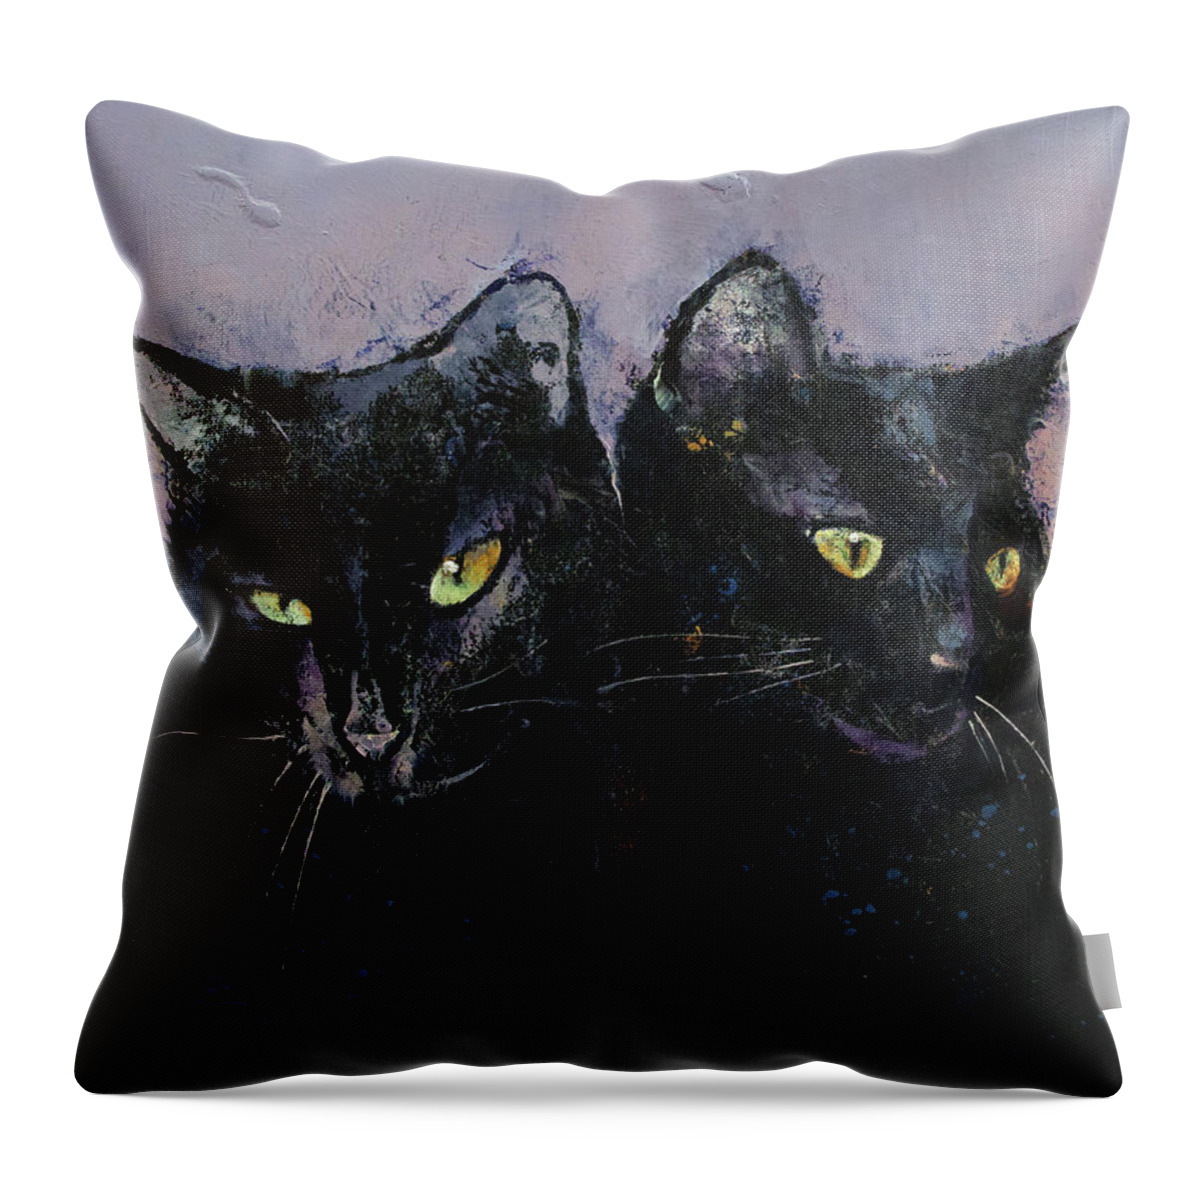 Abstract Throw Pillow featuring the painting Gothic Cats by Michael Creese